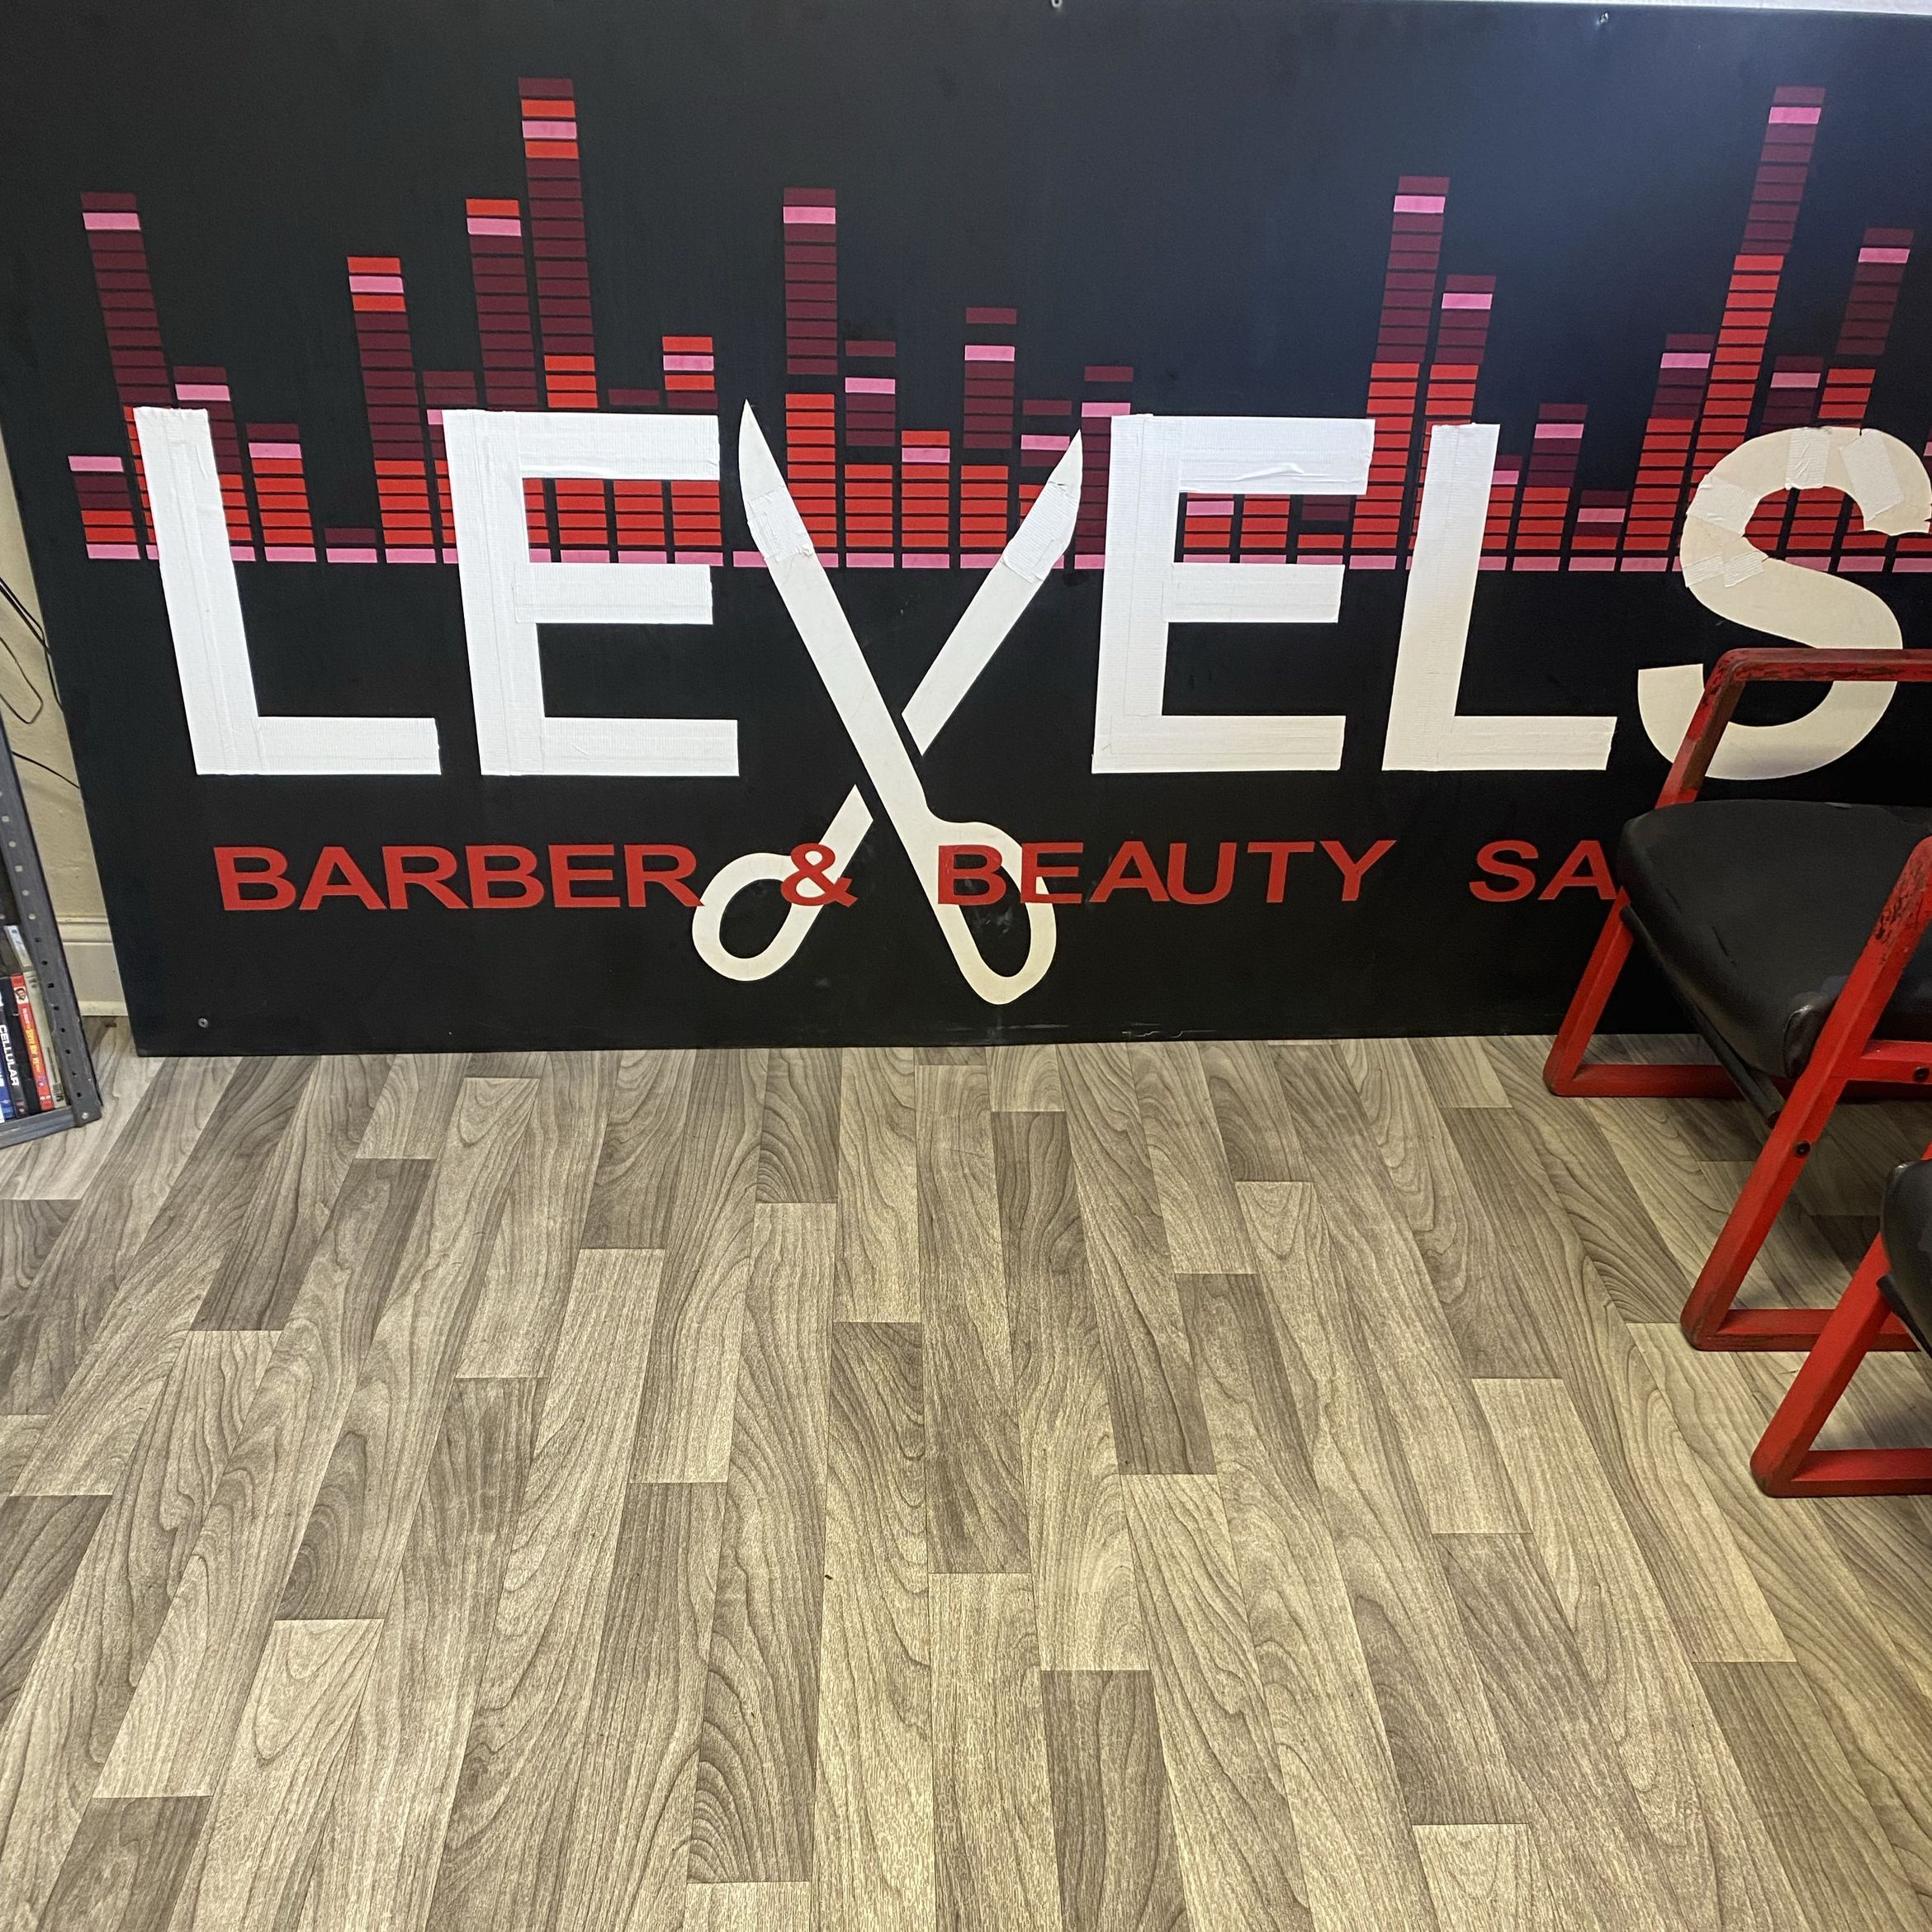 Levels barbershop, 108 Touline St, Natchitoches, 71457